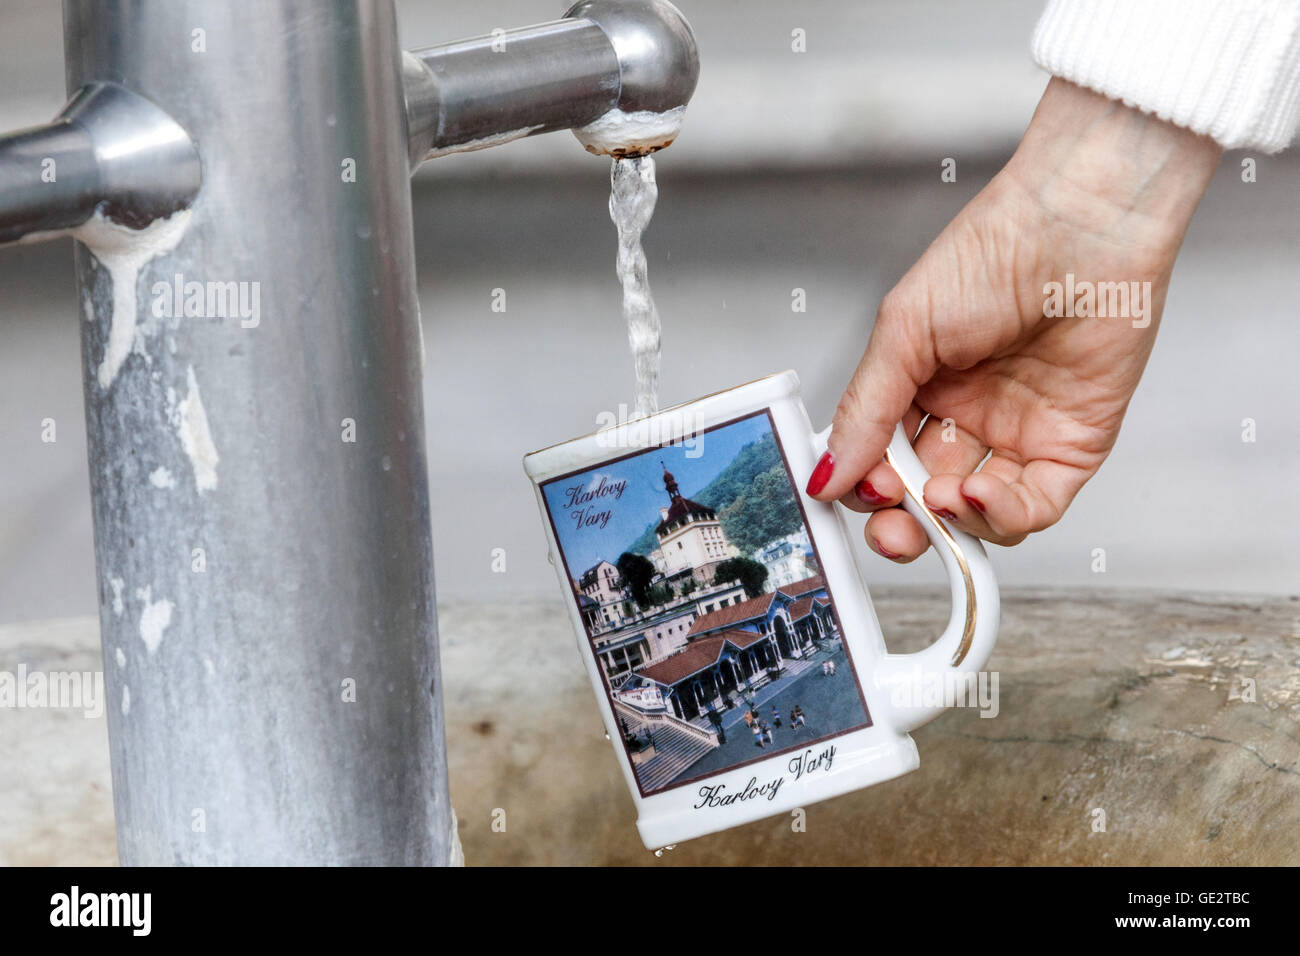 Spa cup for mineral water drink, Karlovy Vary spa town, West Bohemia, Czech Republic Stock Photo